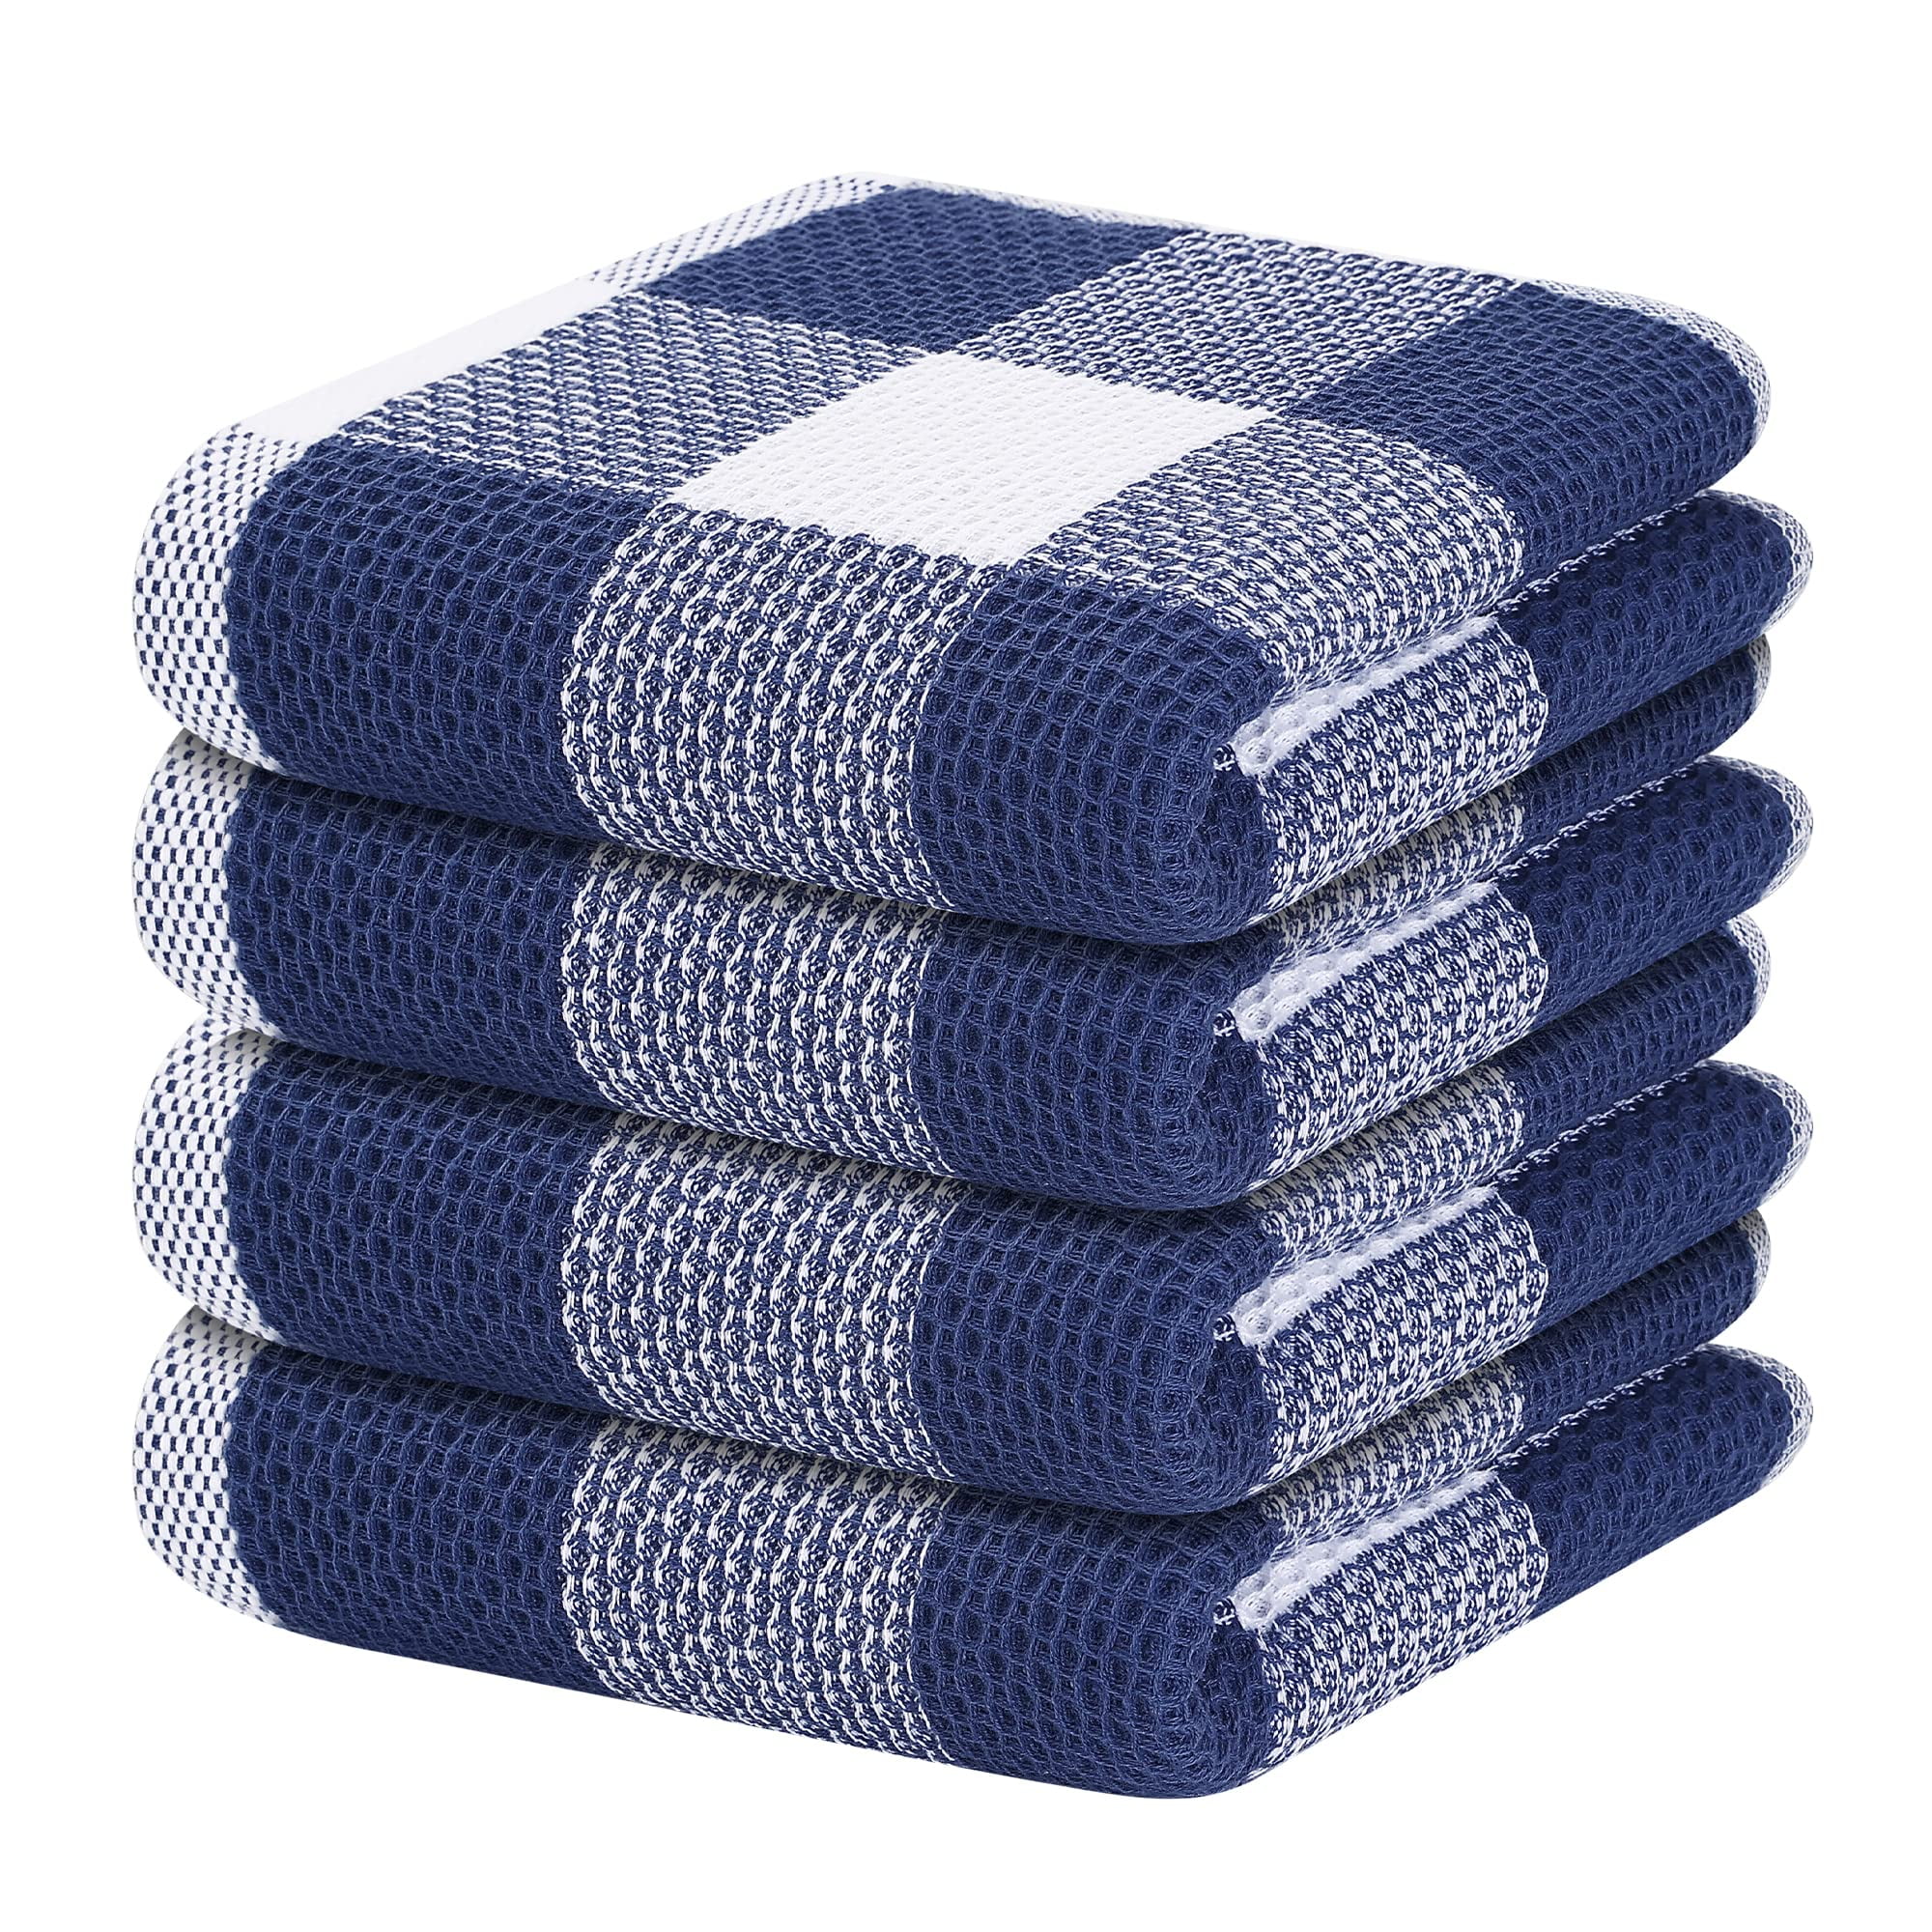 Cotton Kitchen Towels with Hanging Loop, Waffle Flat Terry Hand Towels Set of 4, Absorbent & Fast Dry Dishtowels 25x16 Stripe Plaid Multicolor Blue